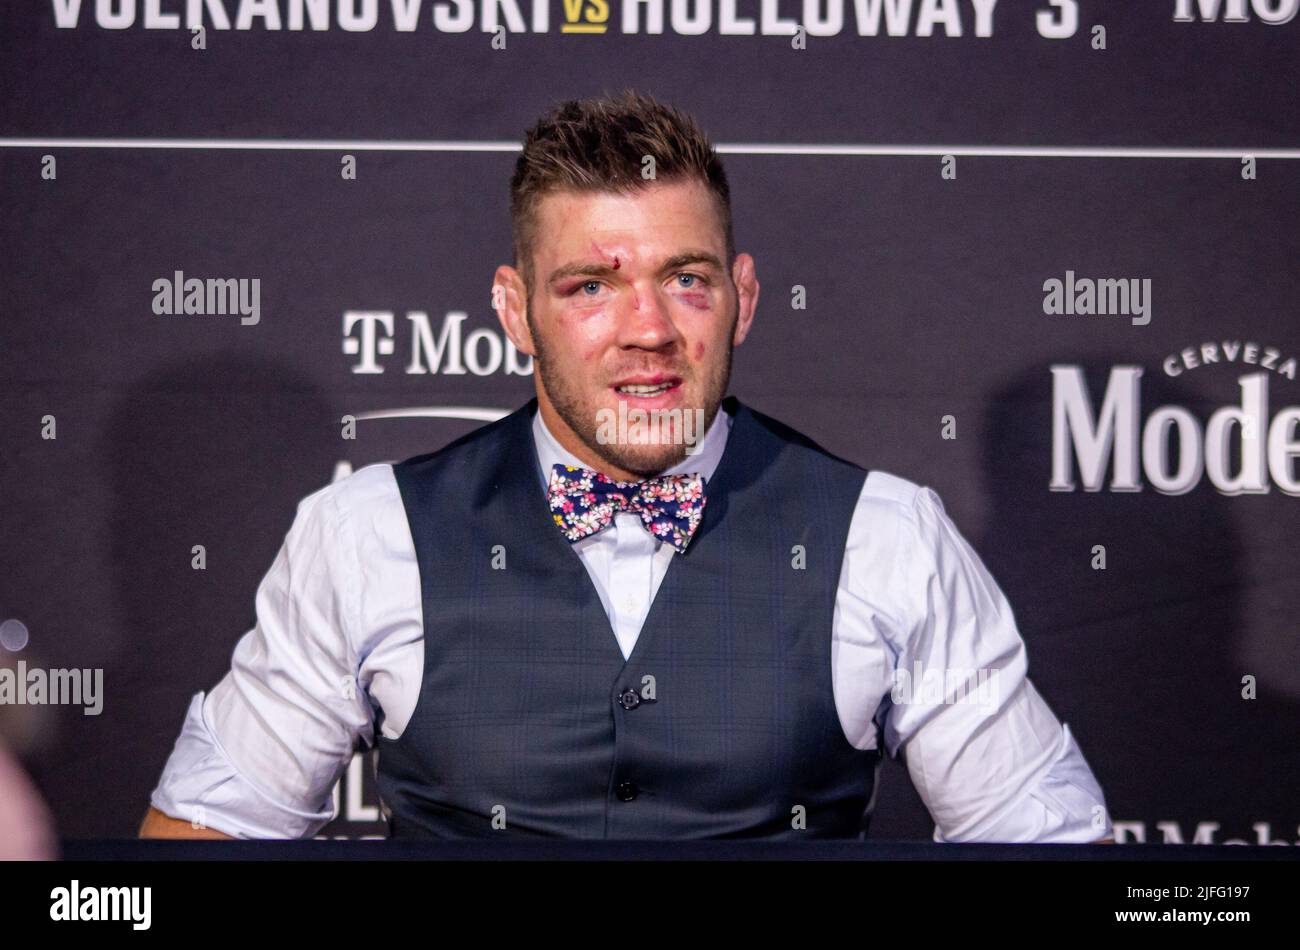 Las Vegas, Nv, United States. 02nd July, 2022. LAS VEGAS, NV - July 2: Dricus Du Plessis addresses the media following his Hard Fought Decision (29-28 x 3) victory over Brad Tavares at UFC 276: Adasenya vs Cannonier at T-Mobile Arena, Las Vegas, NV, United States. (Photo by Matt Davies/PxImages) Credit: Px Images/Alamy Live News Stock Photo